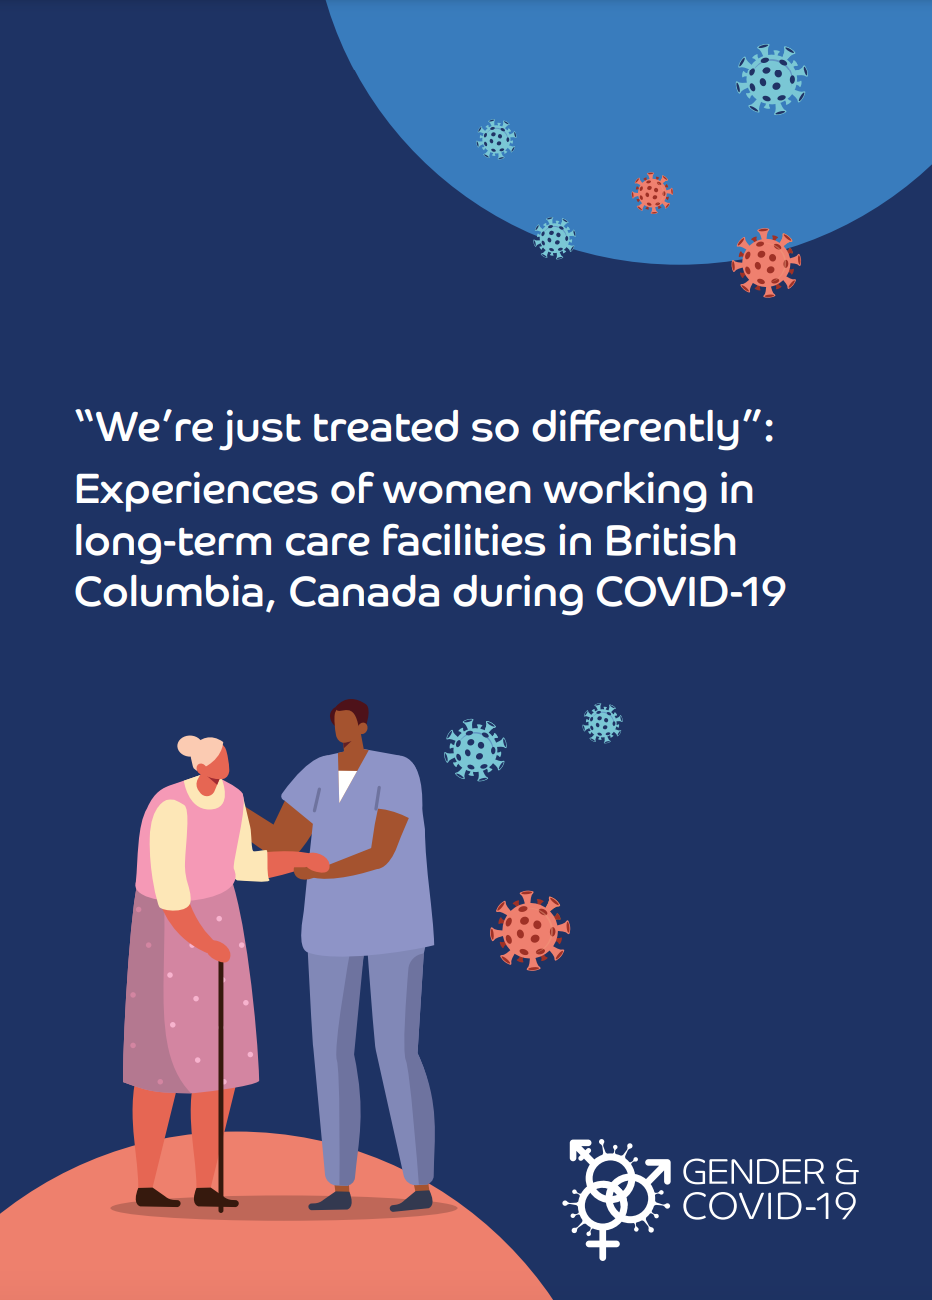 “We’re just treated so differently”: Experiences of women working in long-term care facilities in British Columbia, Canada during COVID-19